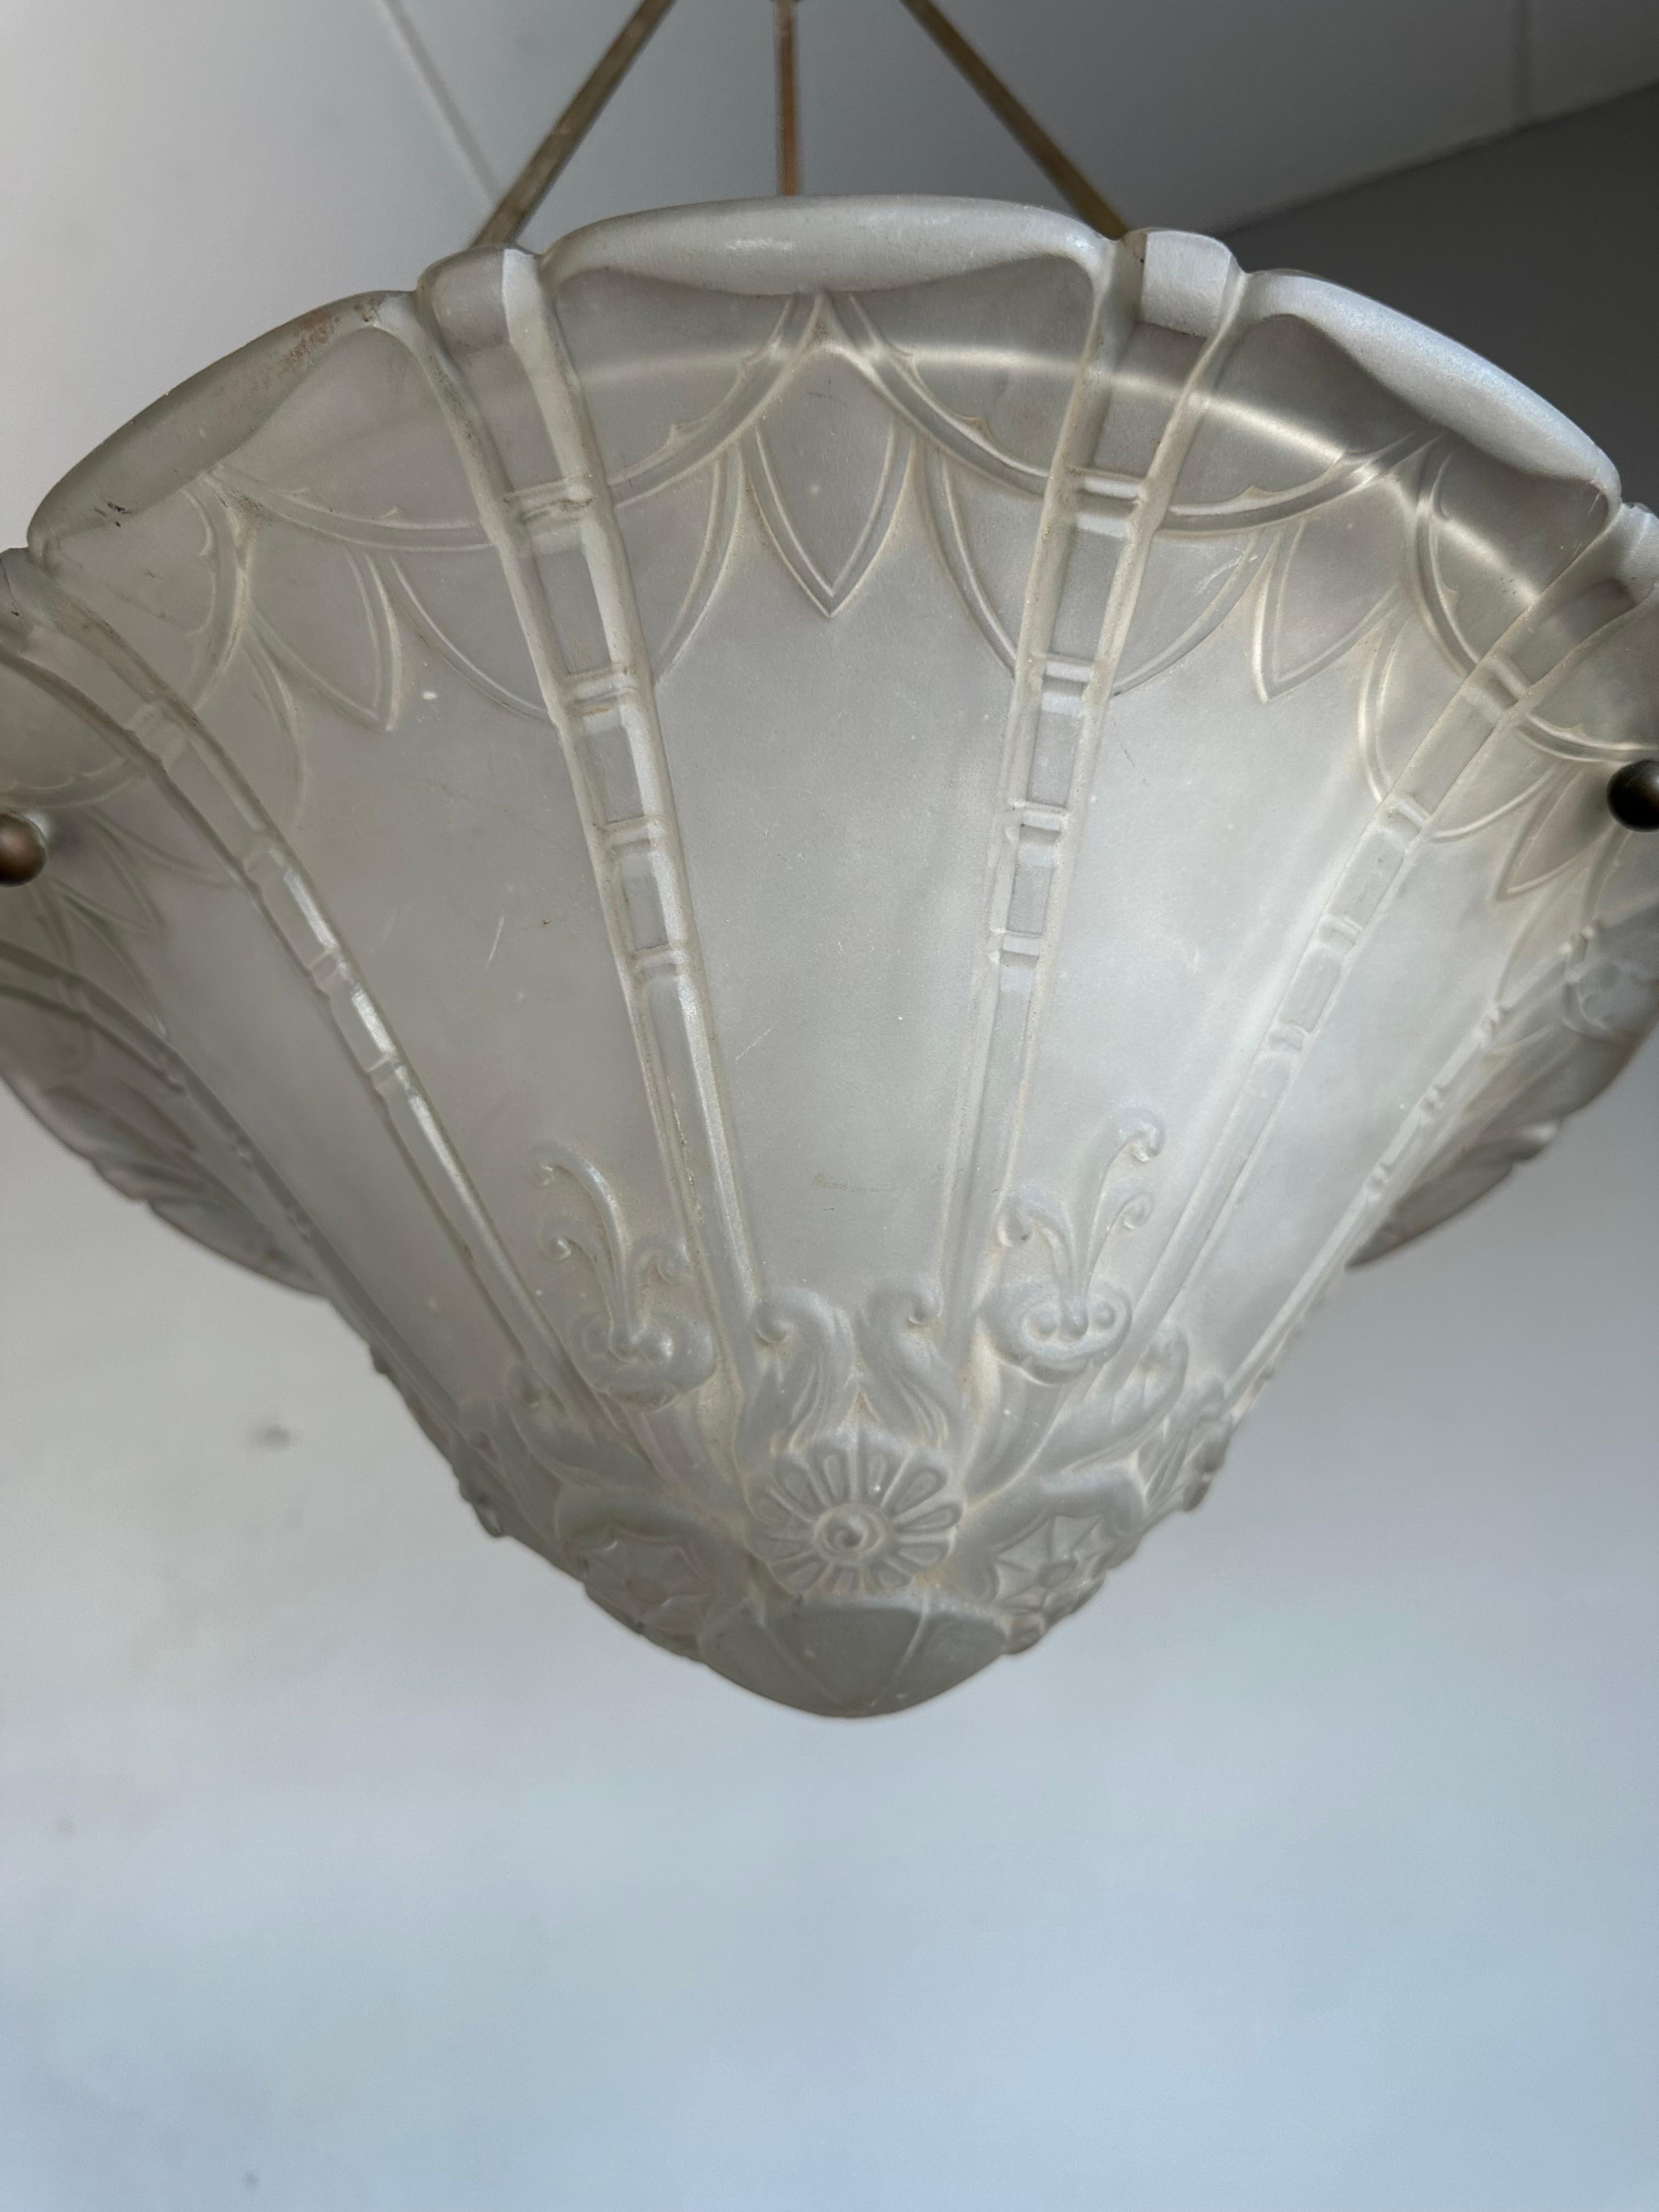 Another top quality made, antique French Art Deco pendant light with the wow factor.

This Art Deco chandelier by Pierre D'Avesn was all hand-crafted at Daum's (Croismare, Nancy) studio in the early 1930s. This fine specimen is pressed in a thick